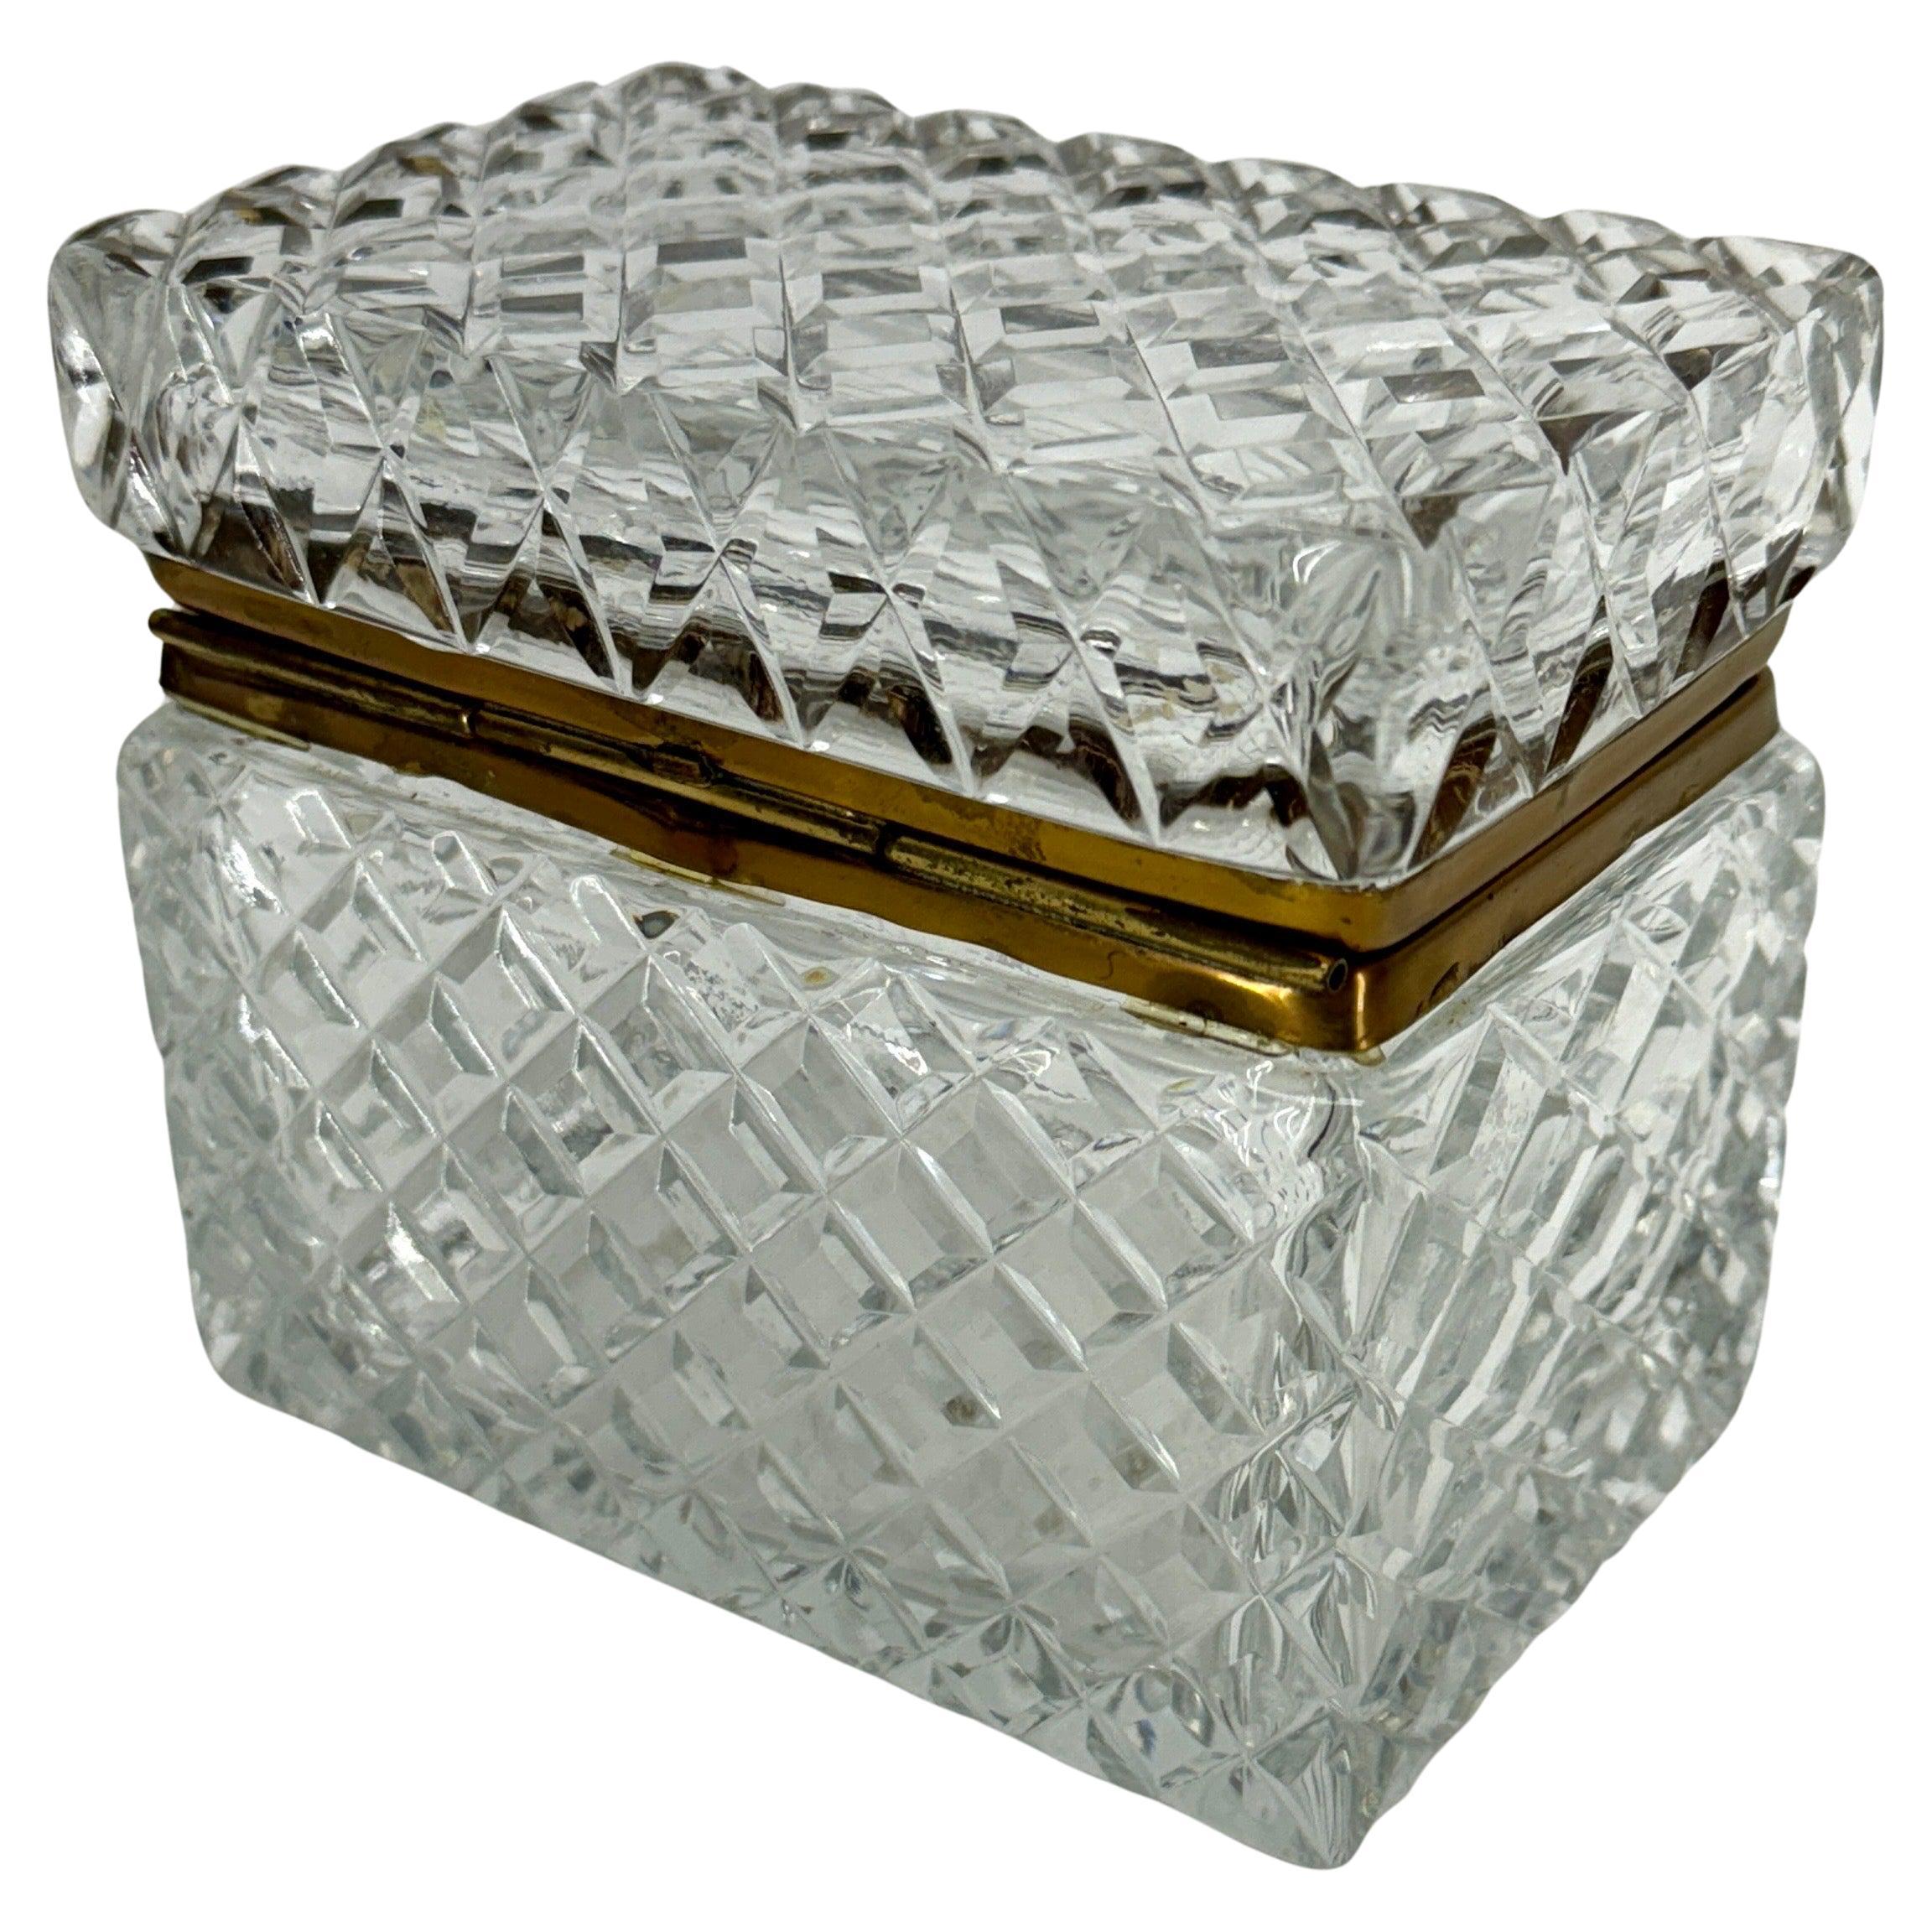 Hand-Crafted Rectangular Baccarat Style Cut Crystal Lidded Box with Brass Hardware For Sale